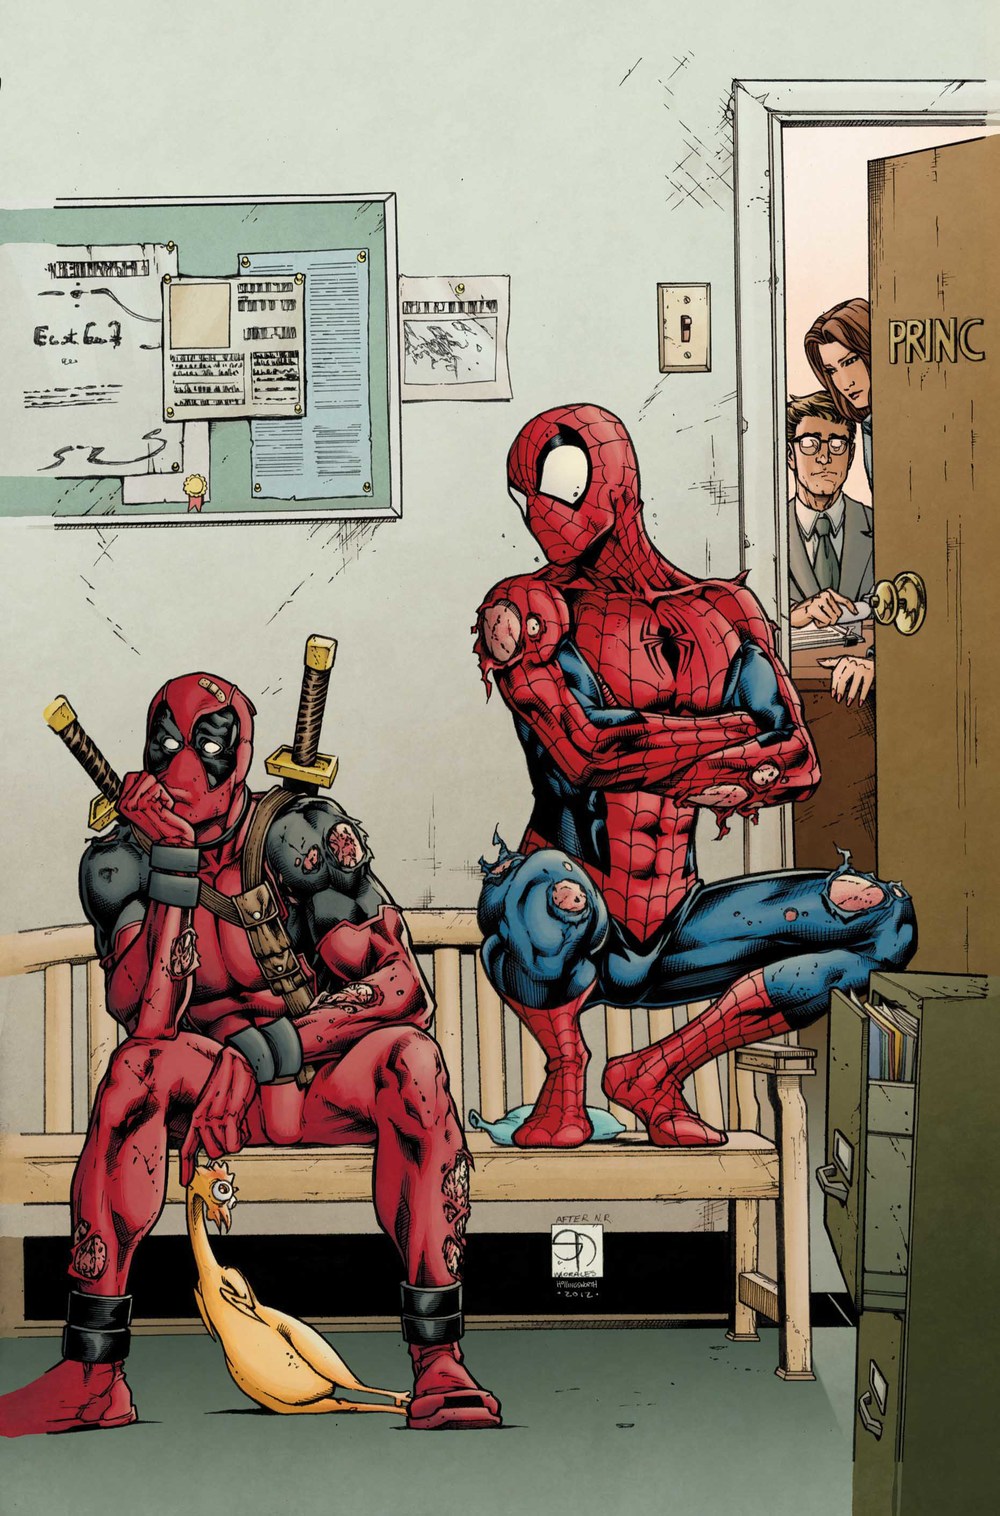 SpiderMan and Deadpool Get Sent to the Principal's Office